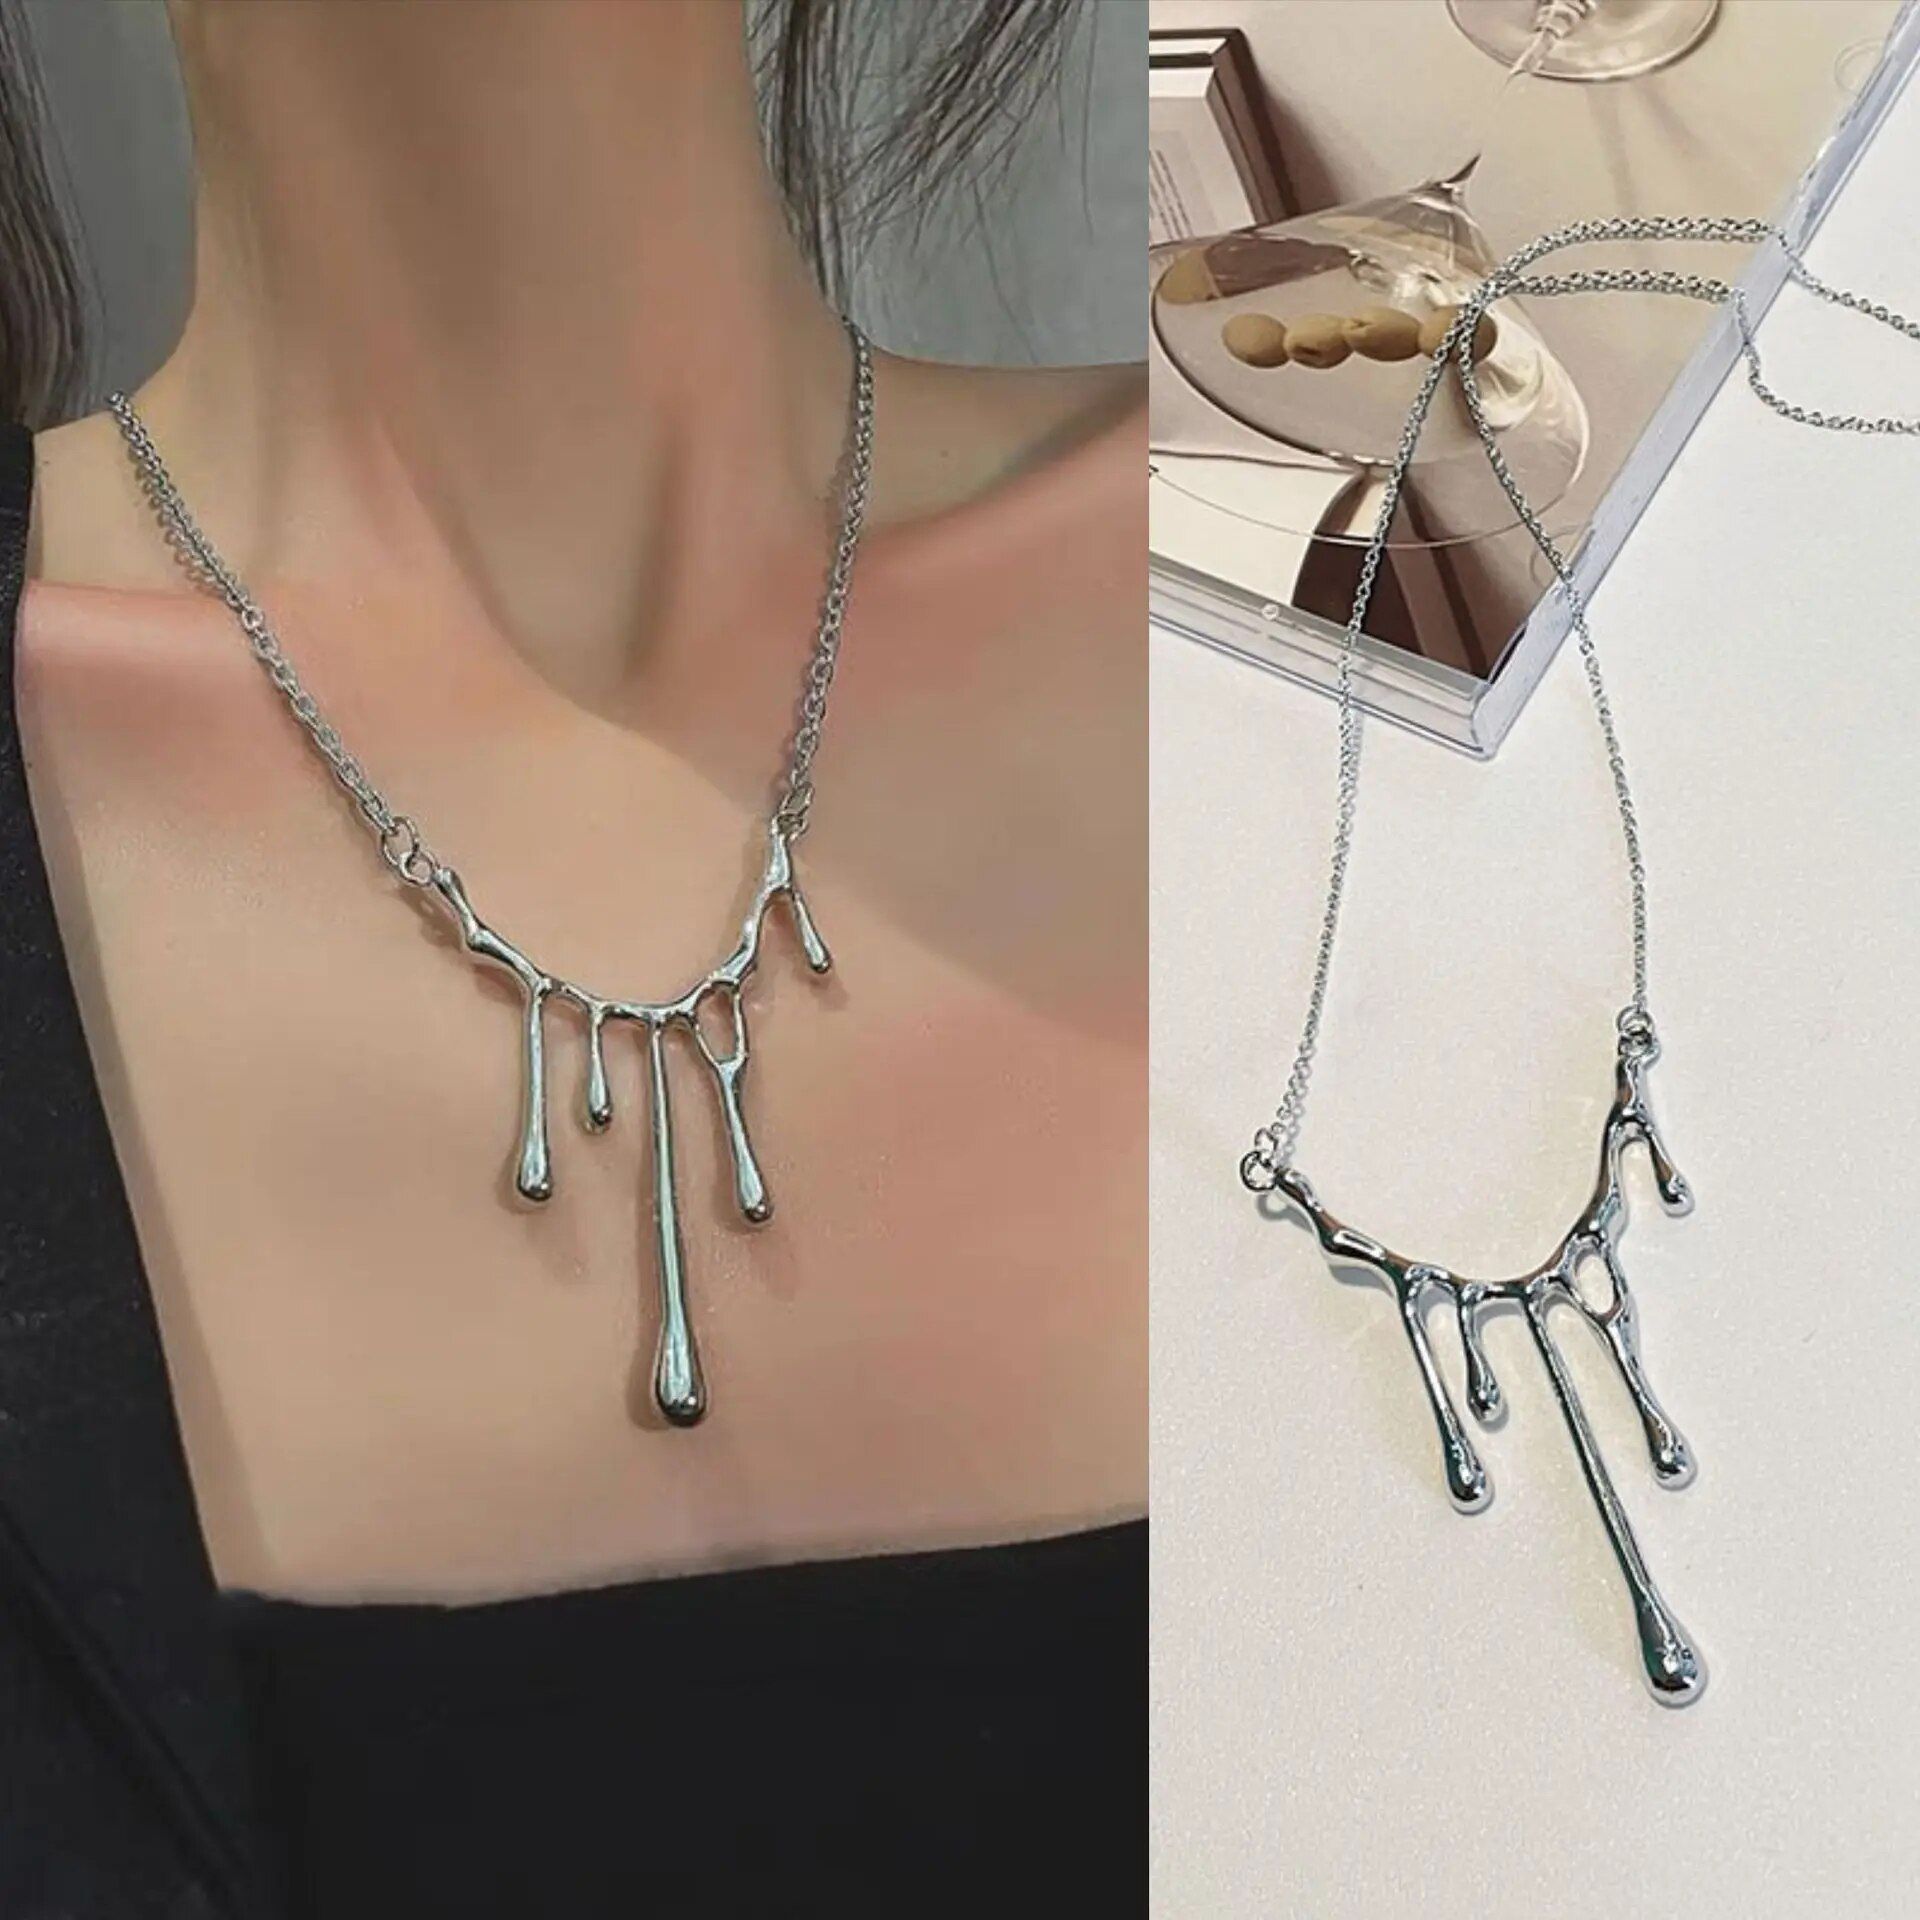 A split-image featuring a woman wearing an Elegant Liquid Drop Shape Yarn Pendant Necklace, epitomizing new fashion style on the left, and the necklace displayed on a mirror surface on the right.